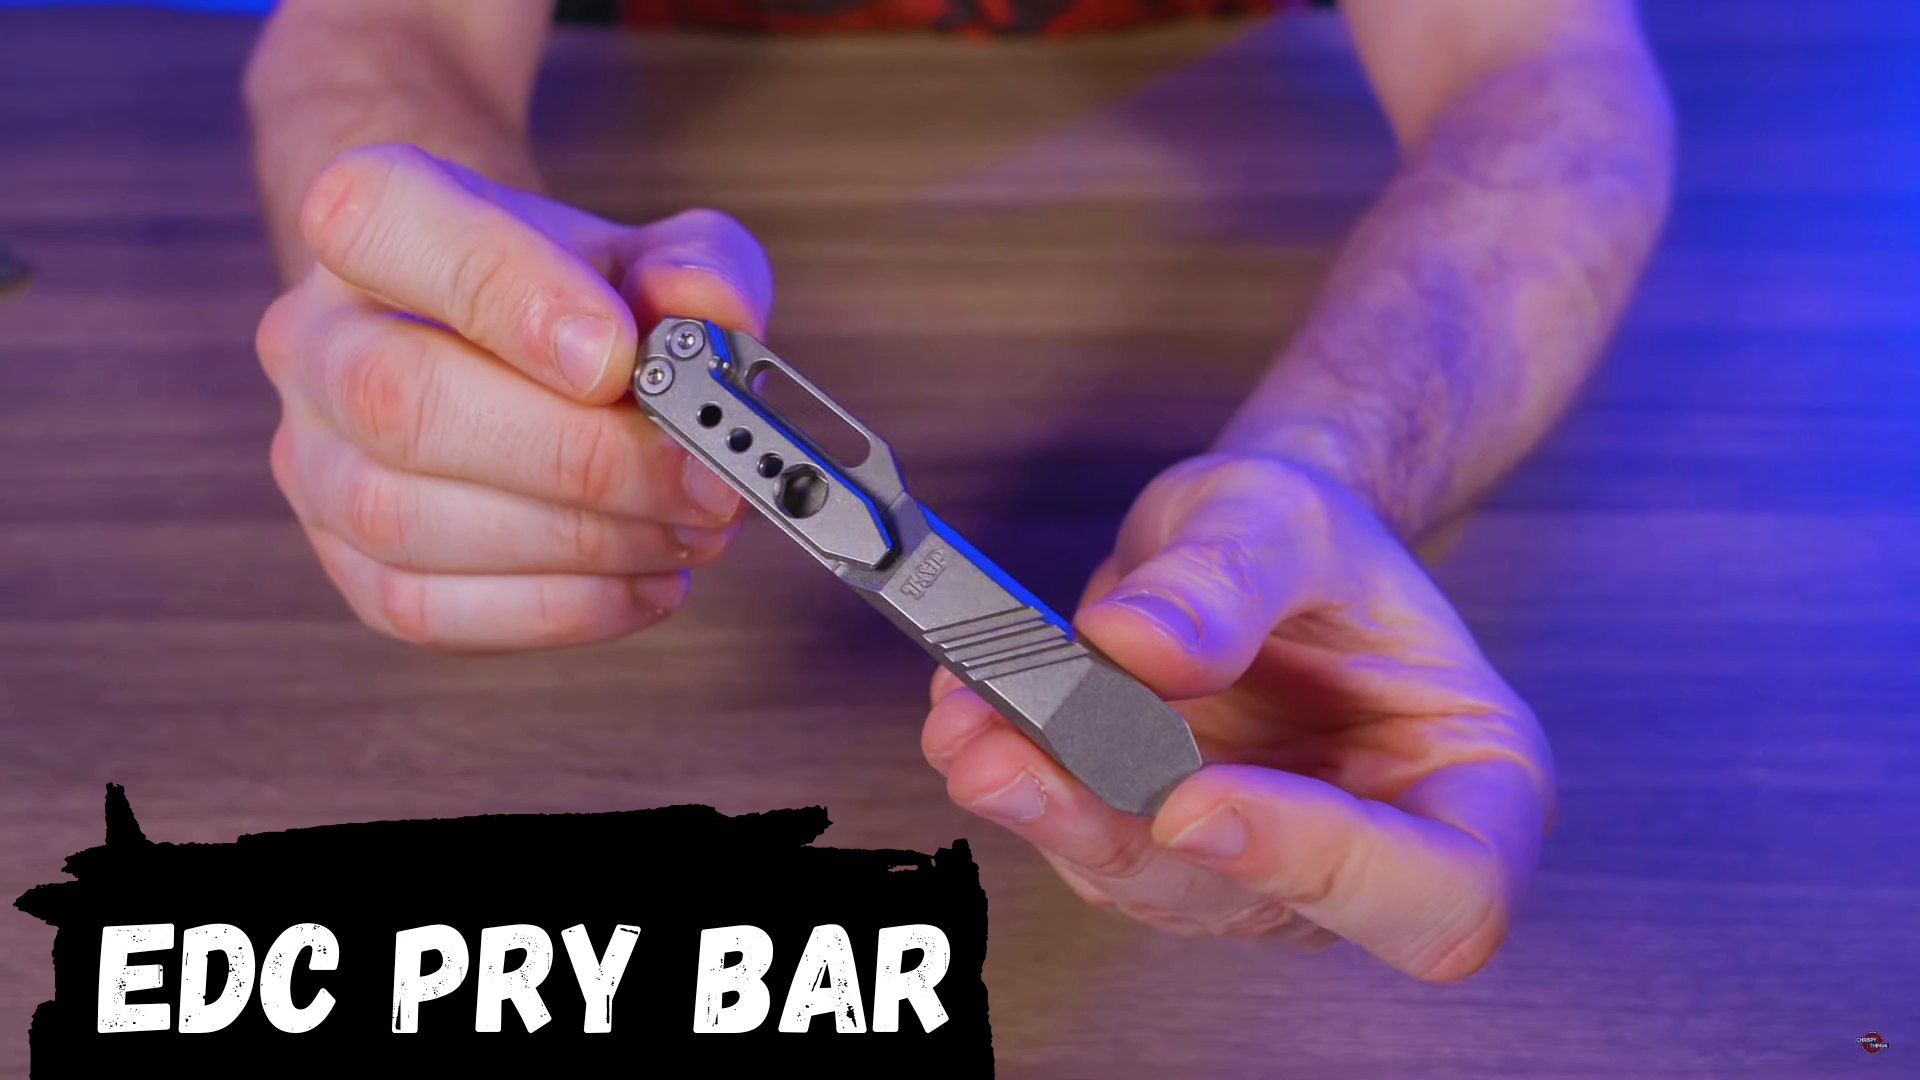 the edc pry bar is being held by a person.